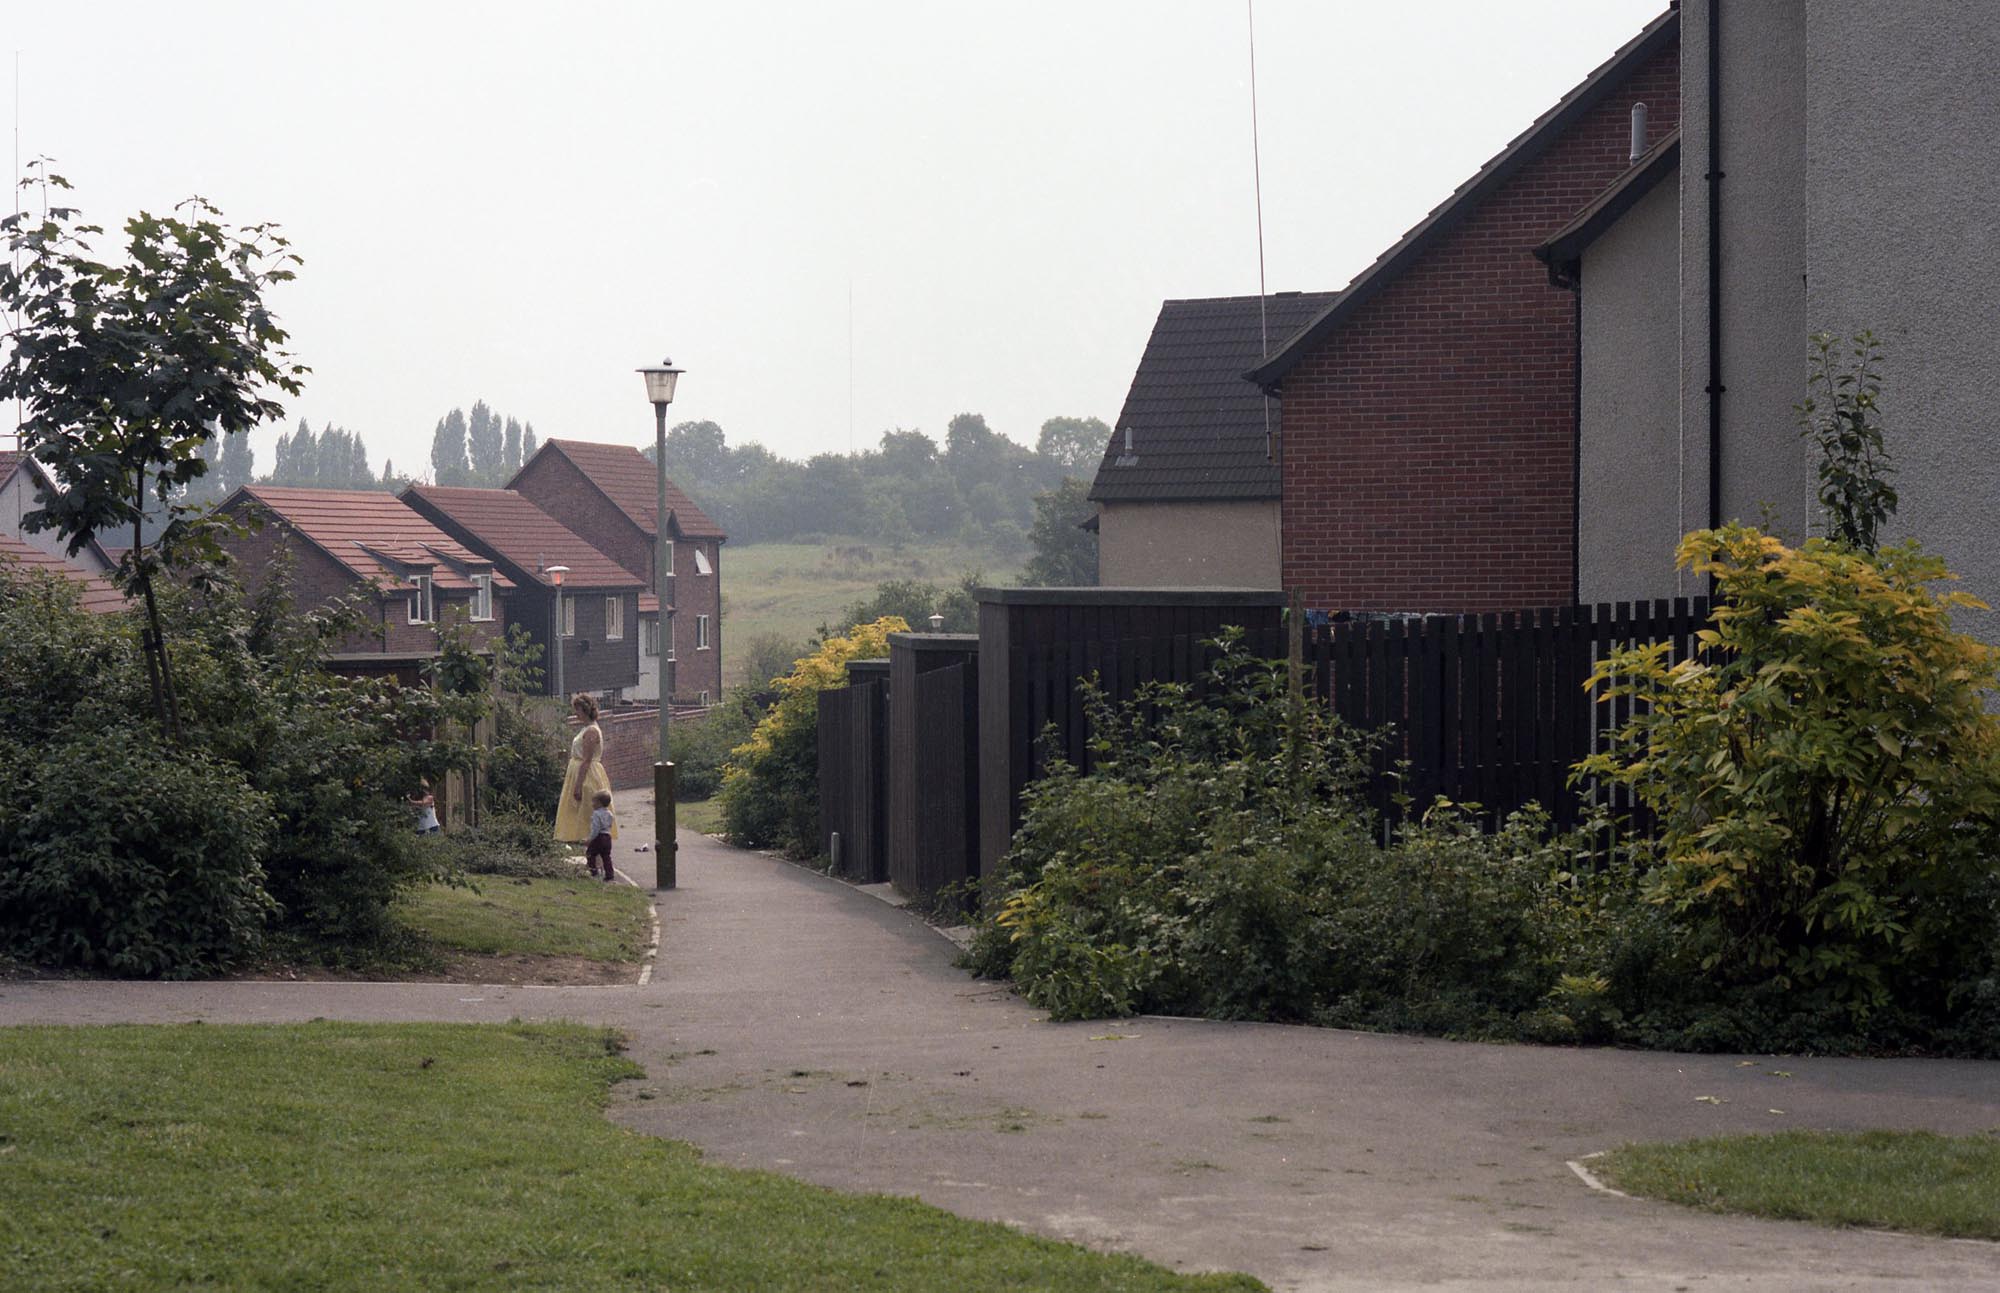 A more recent example social housing in Beaumont Leys, seen here in the 1990s - 